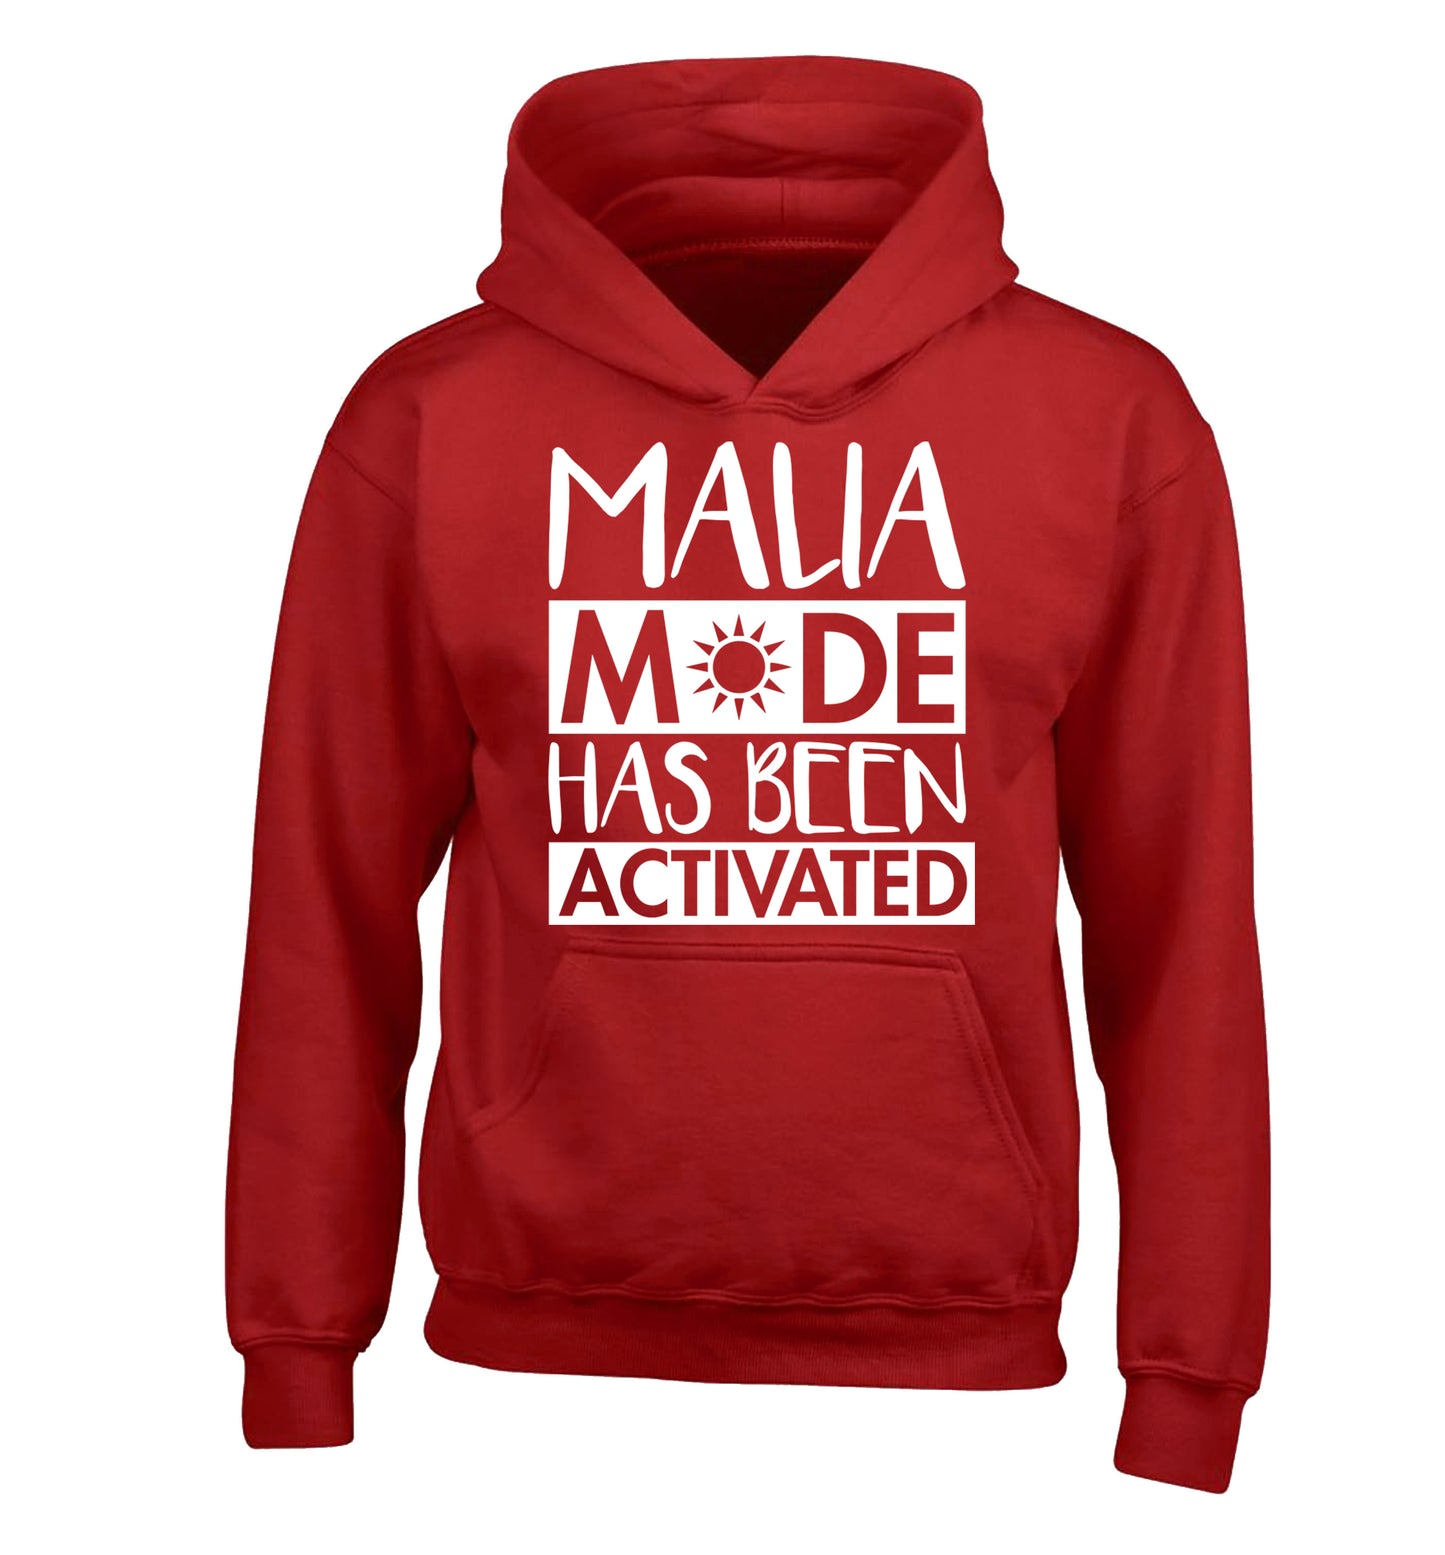 Malia mode has been activated children's red hoodie 12-13 Years